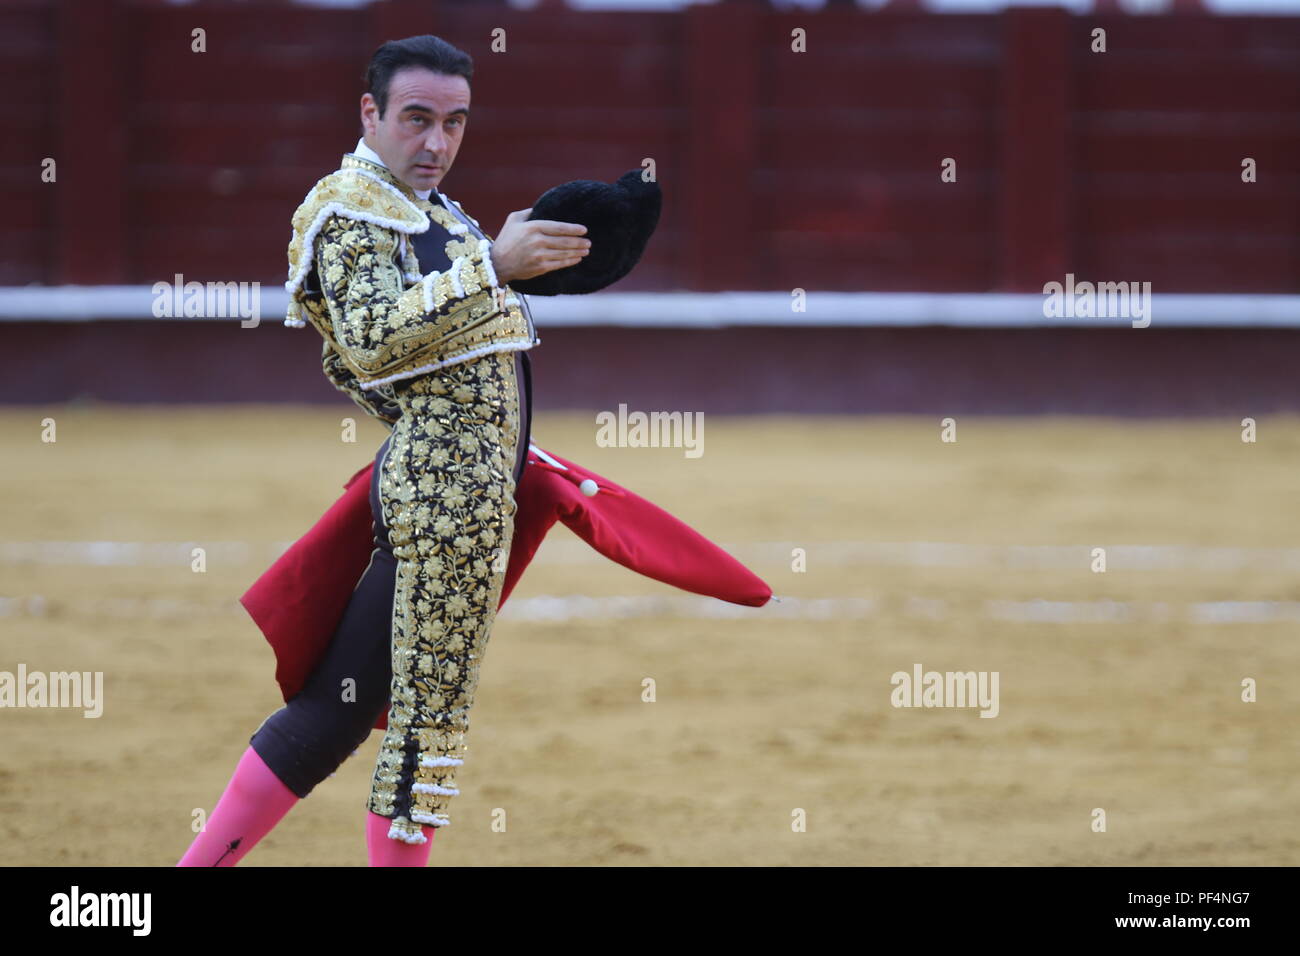 Enrique ponce hi-res stock photography and images - Alamy